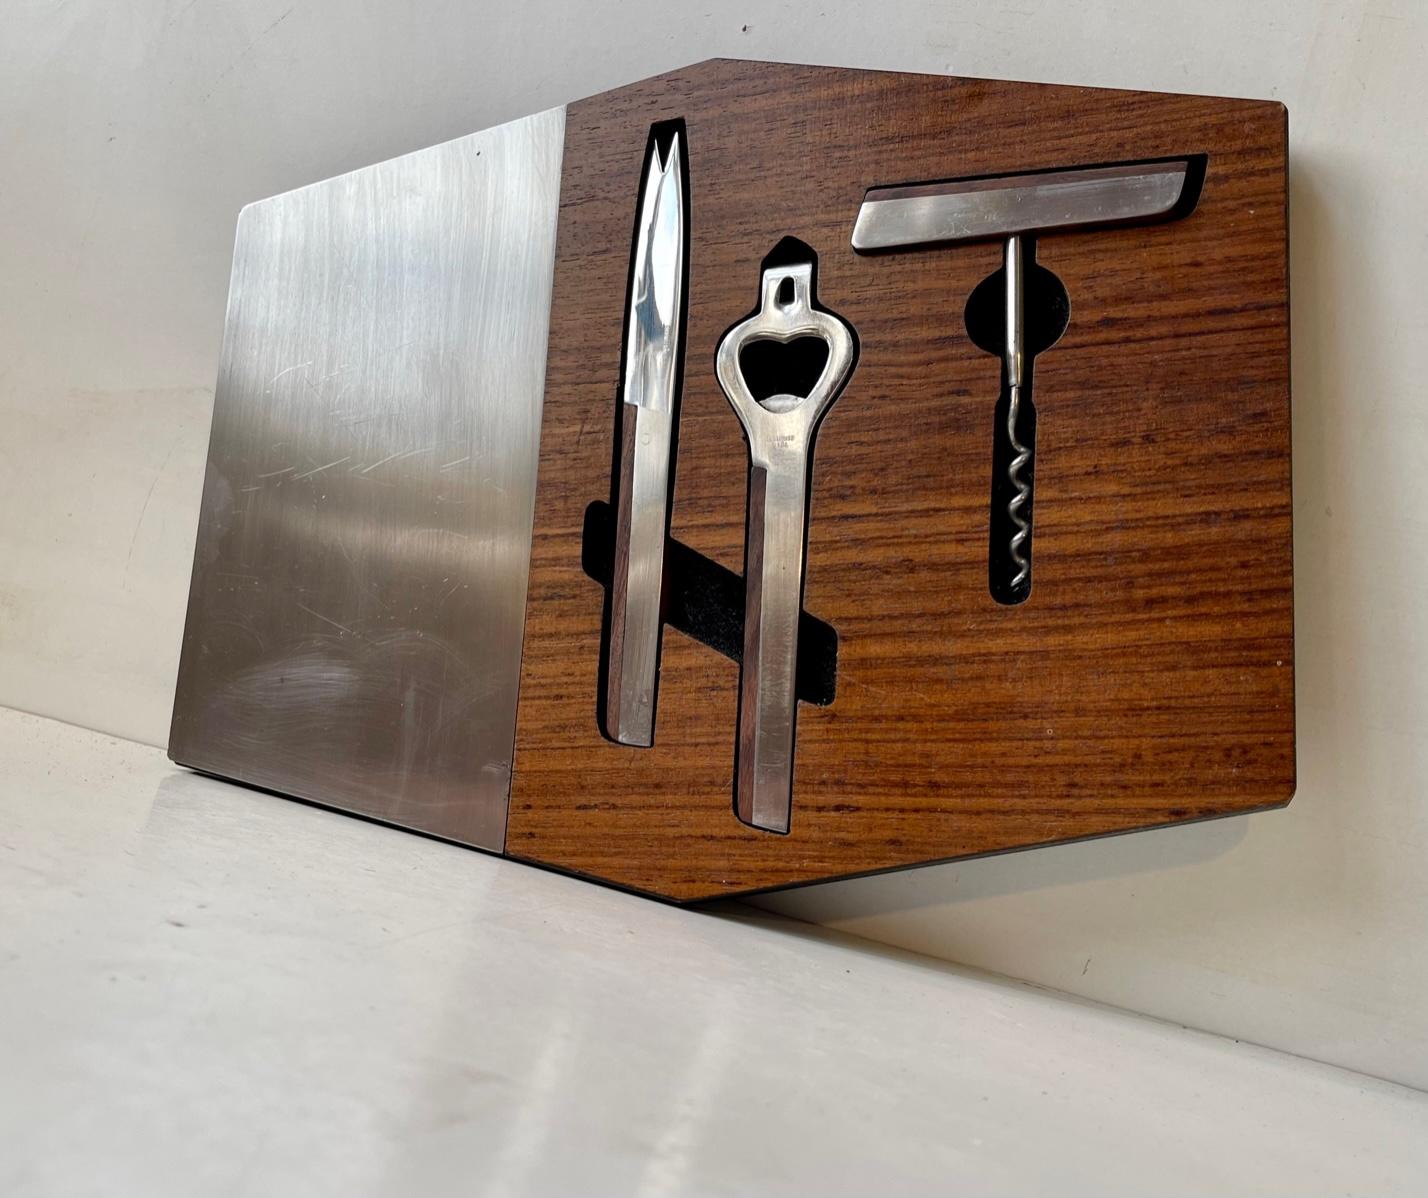 A cool a set of bar accessories that comes integrated into a stylish cutting board in stainless steel and teak. They accessories are: lime/cheese knife, bottle opener and a corkscrew also fashioned from teak and stainless. This set was made in